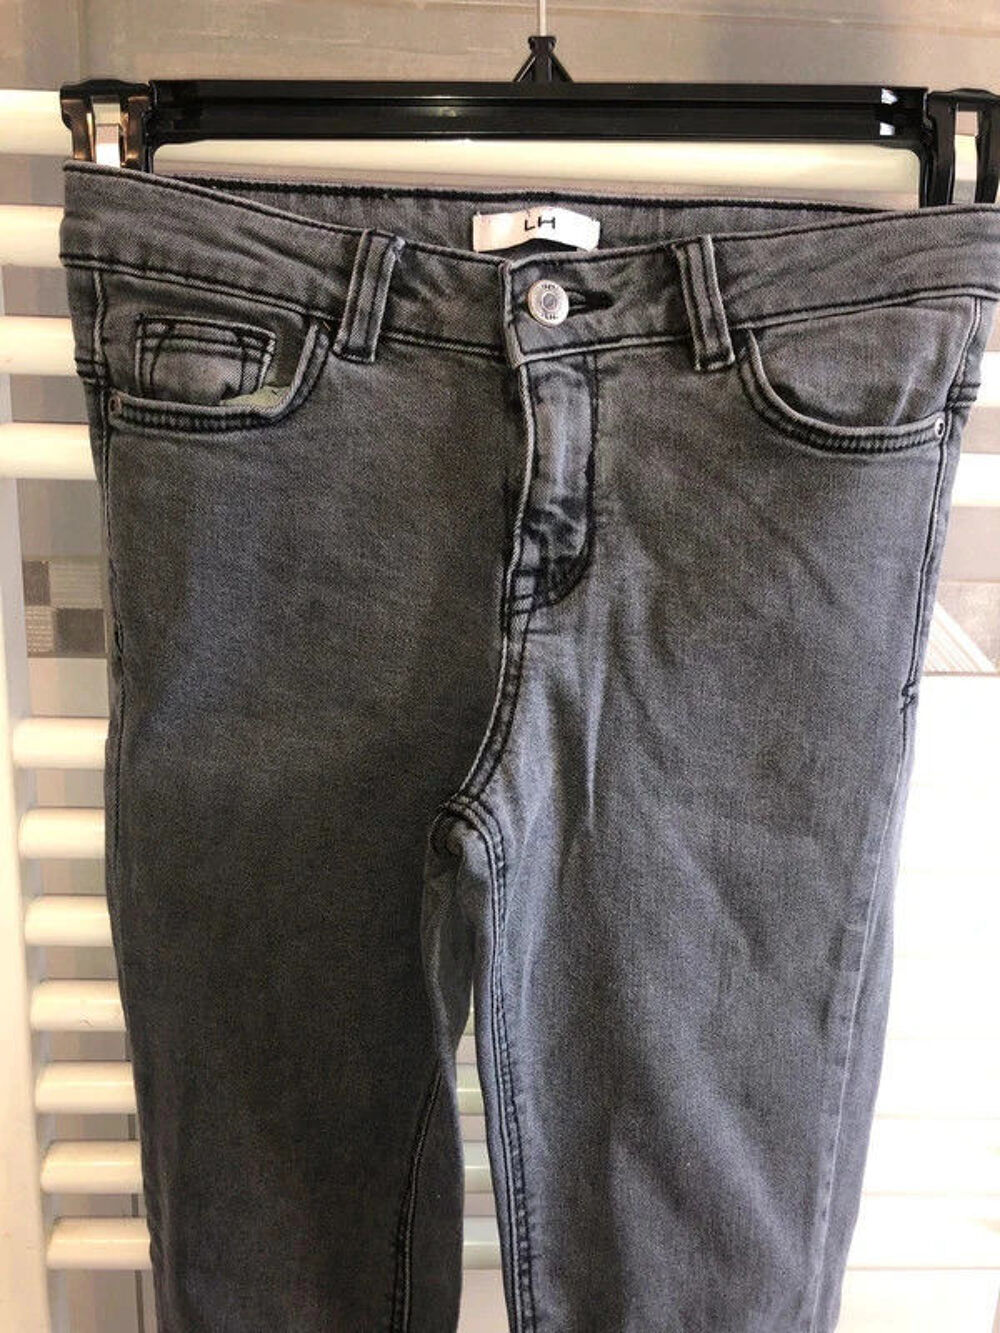 Jeans skinny LH taille XS en tbe &agrave; 8 euros
Vtements